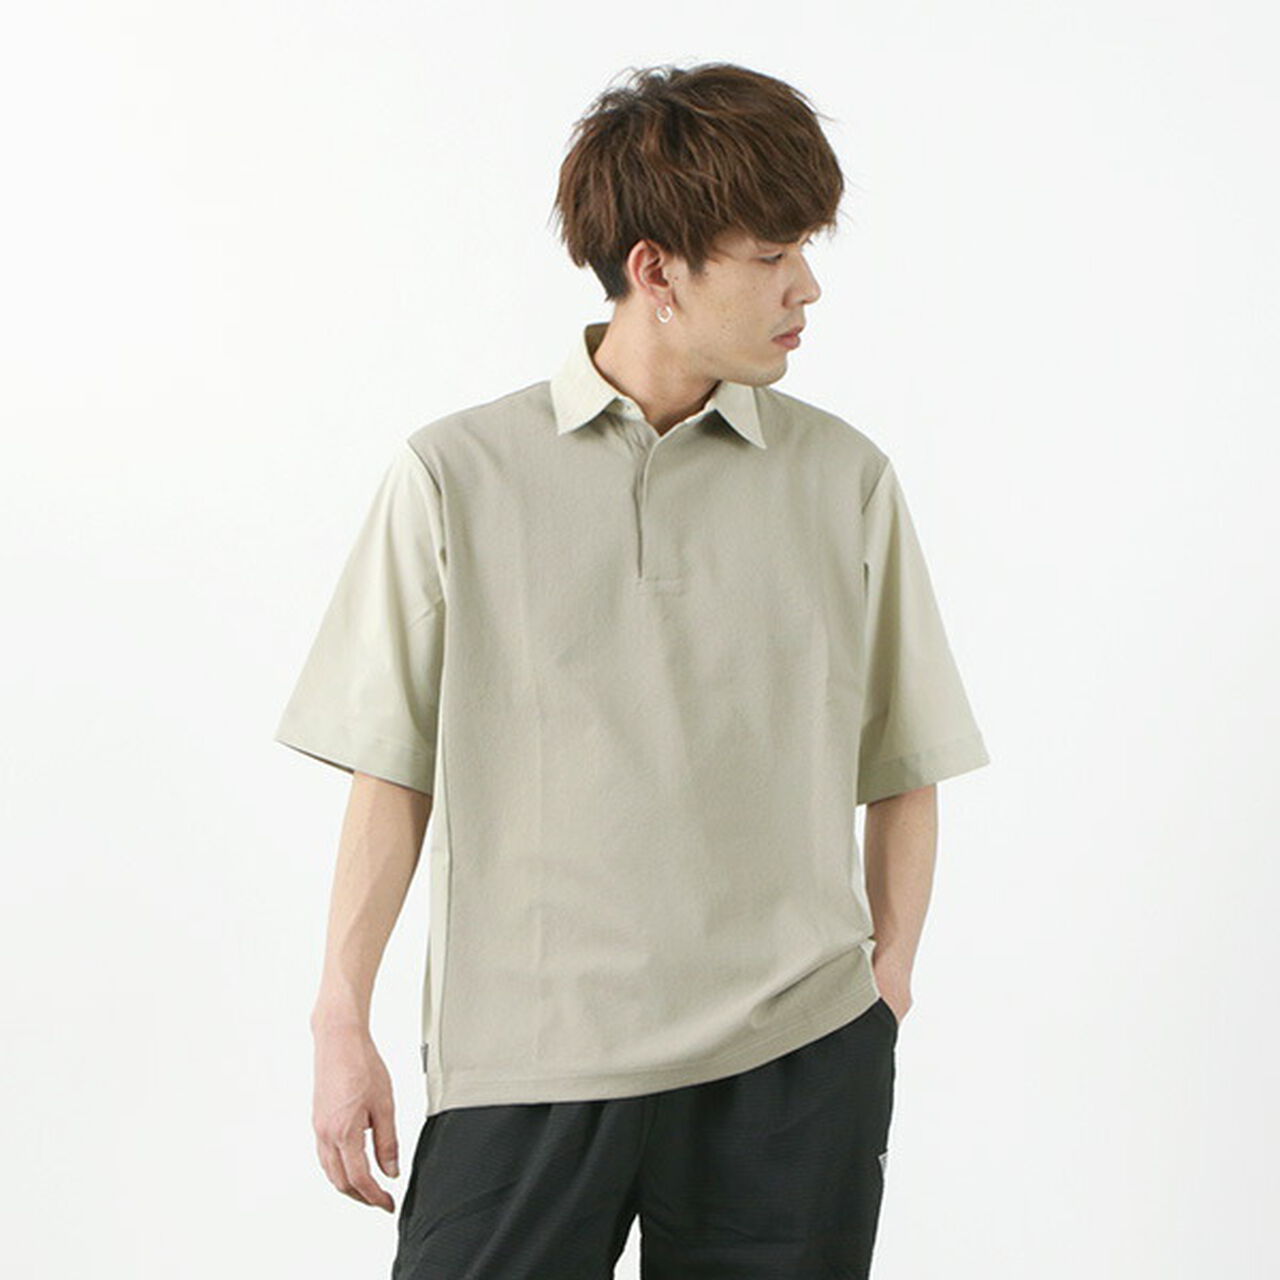 Ice x Dry polo,Beige, large image number 0